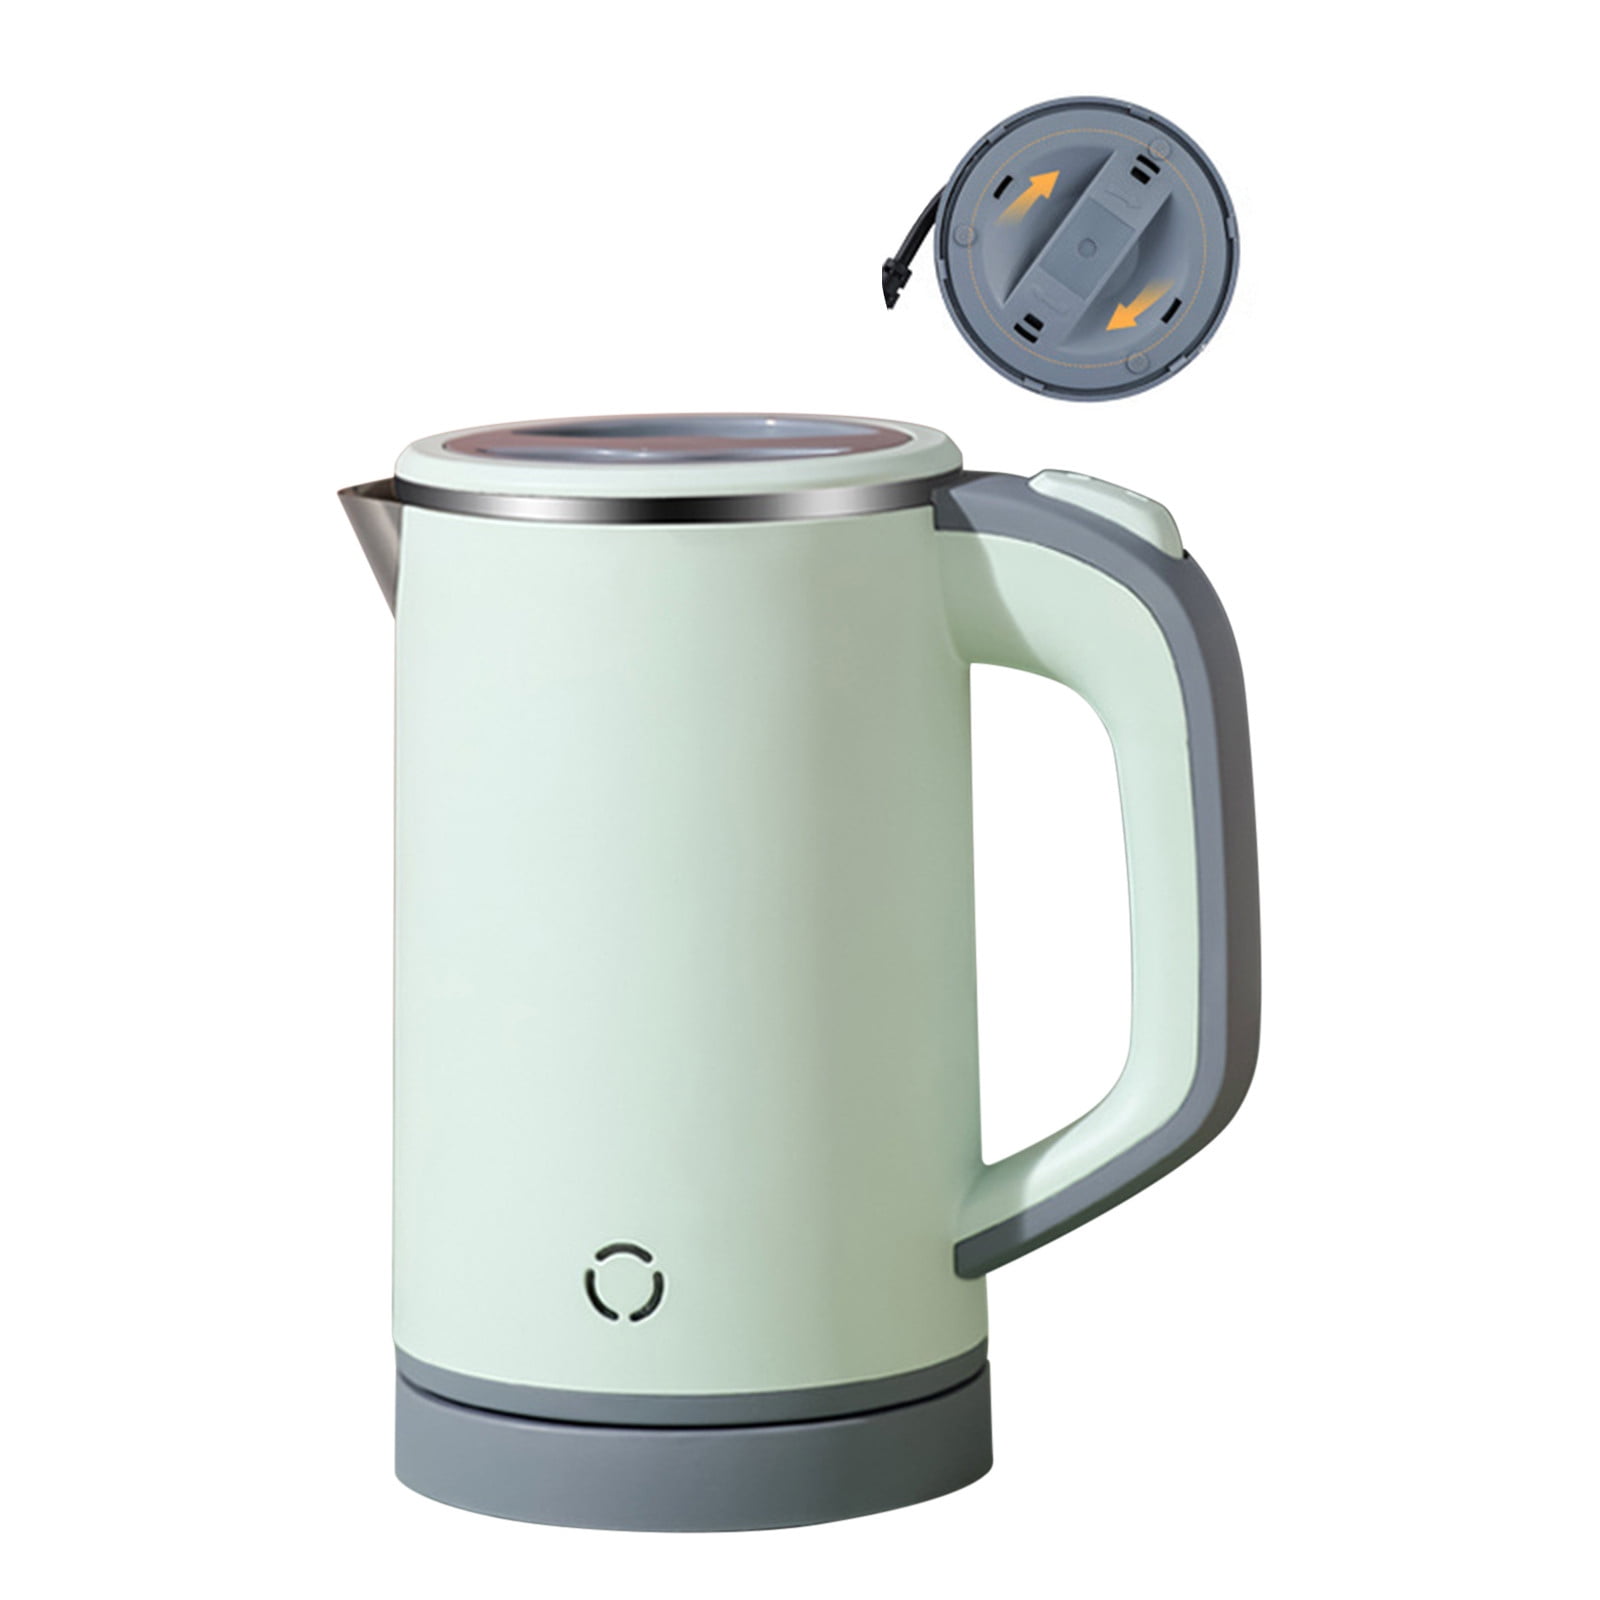 Boots Mini Kettle G style plug 0.5 litres Boil Water dry safe Indicator  Light